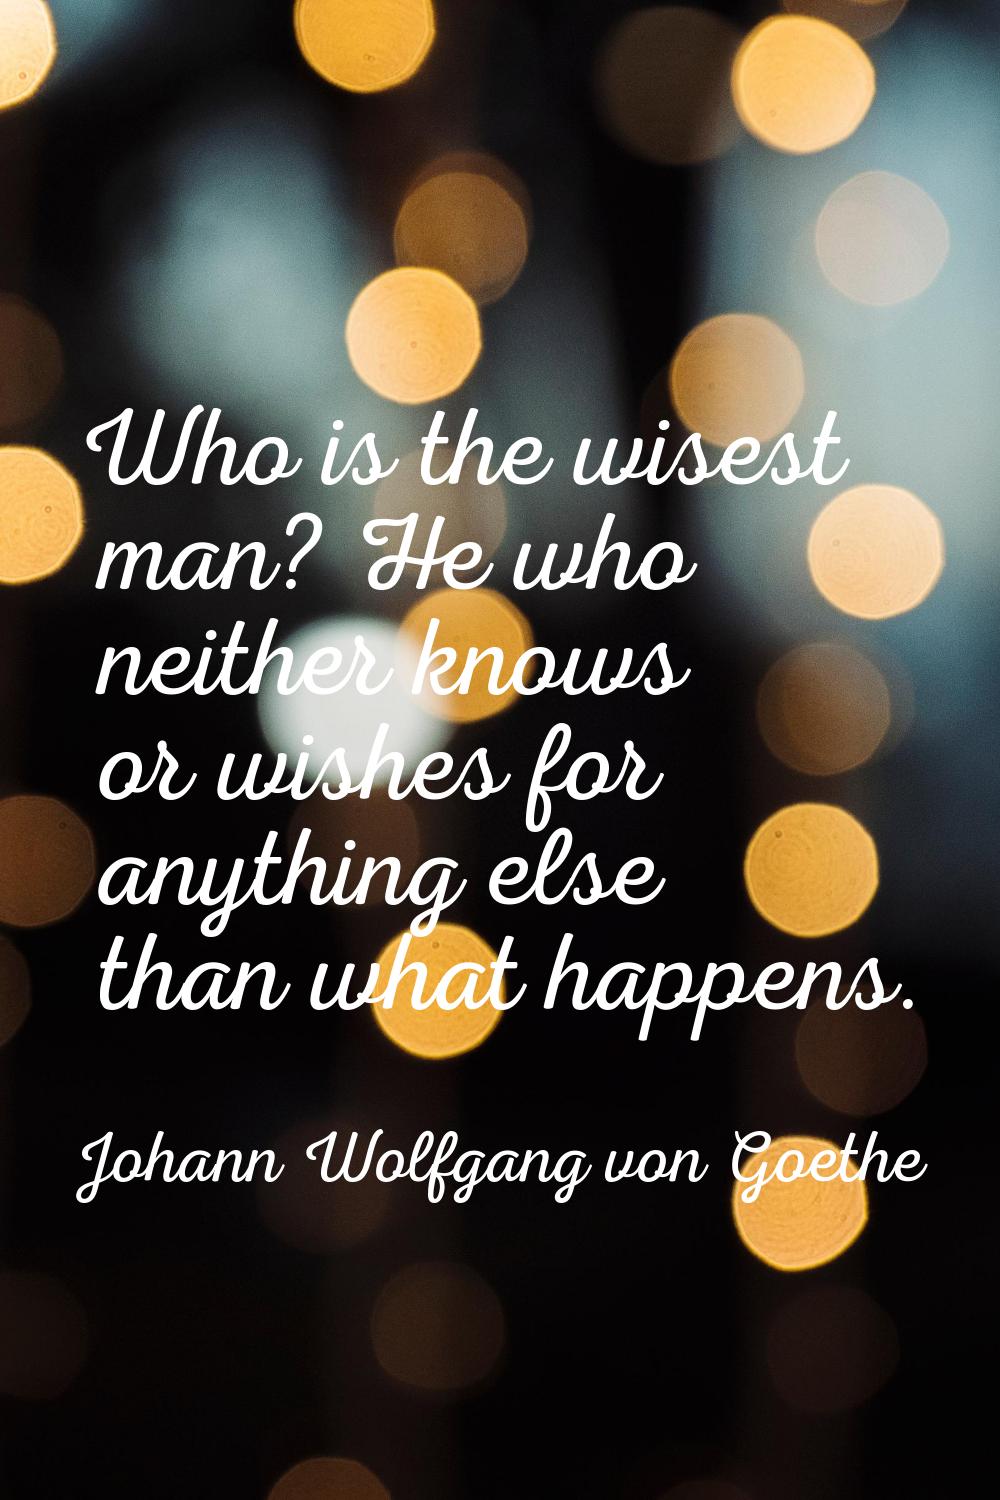 Who is the wisest man? He who neither knows or wishes for anything else than what happens.